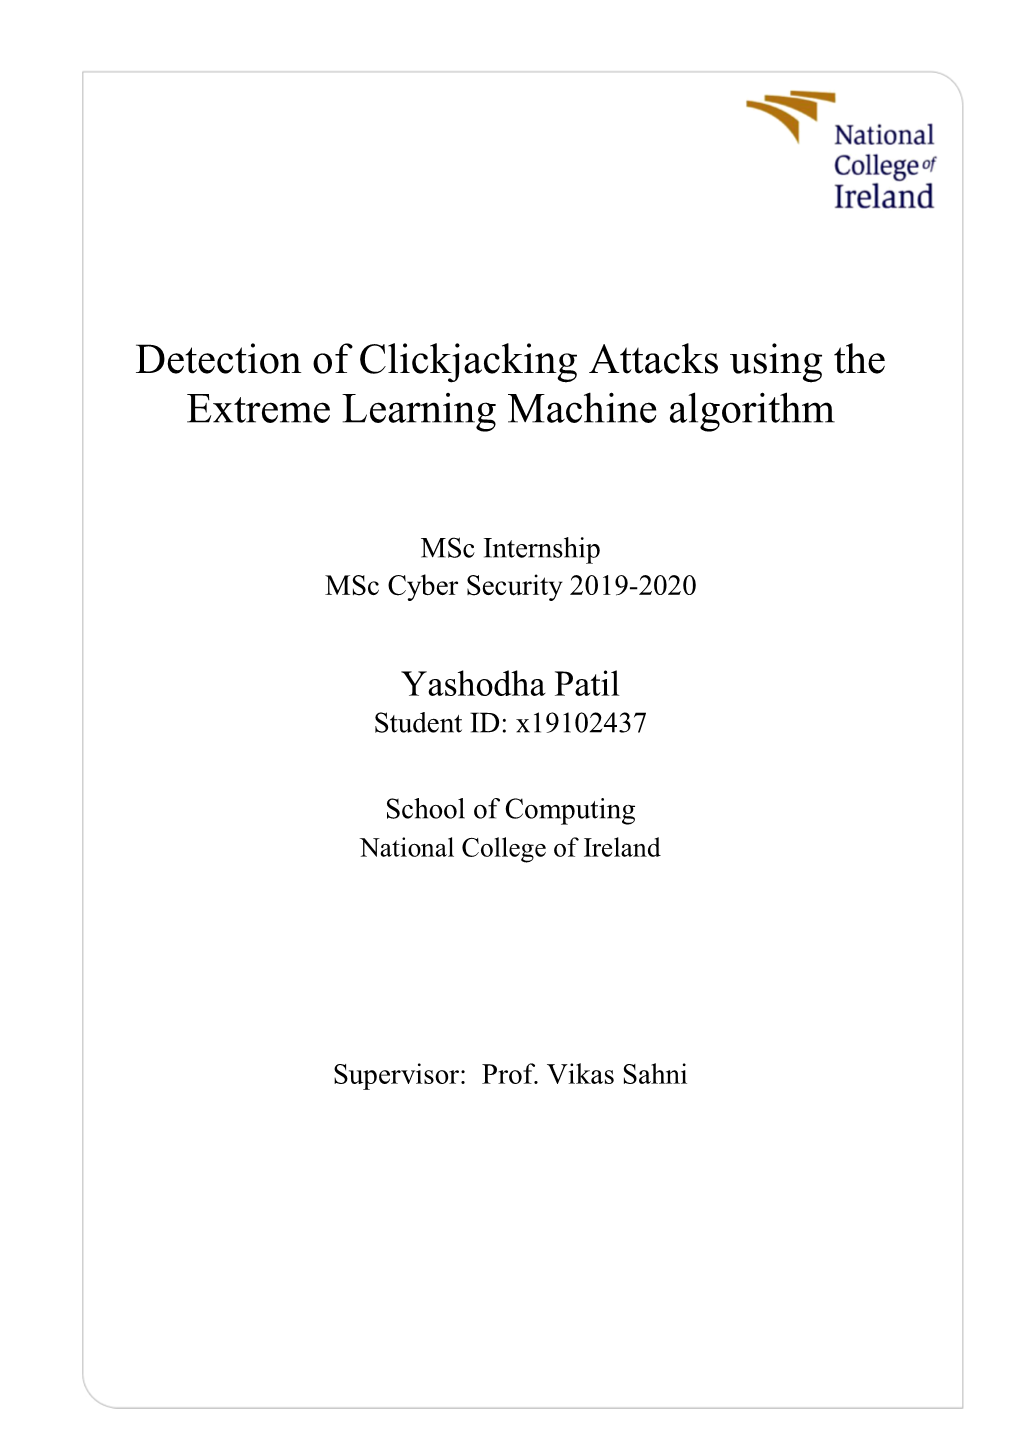 Detection of Clickjacking Attacks Using the Extreme Learning Machine Algorithm